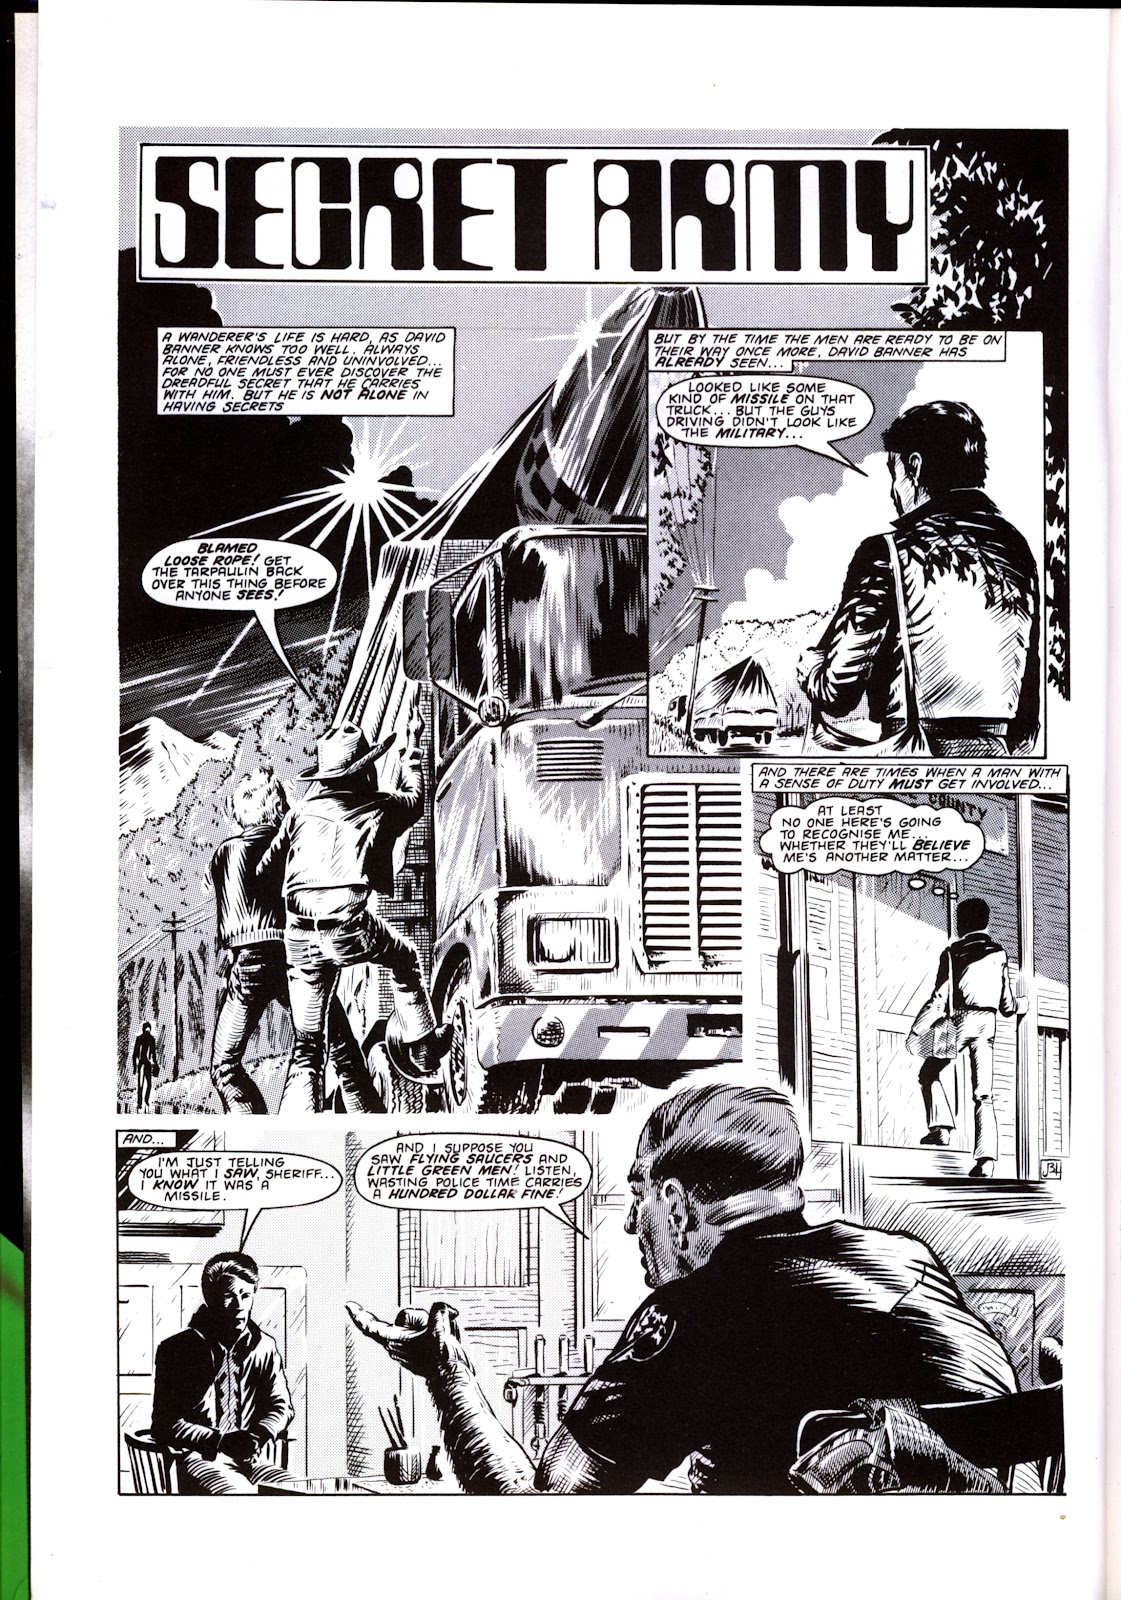 Incredible Hulk Annual issue 1979 - Page 5